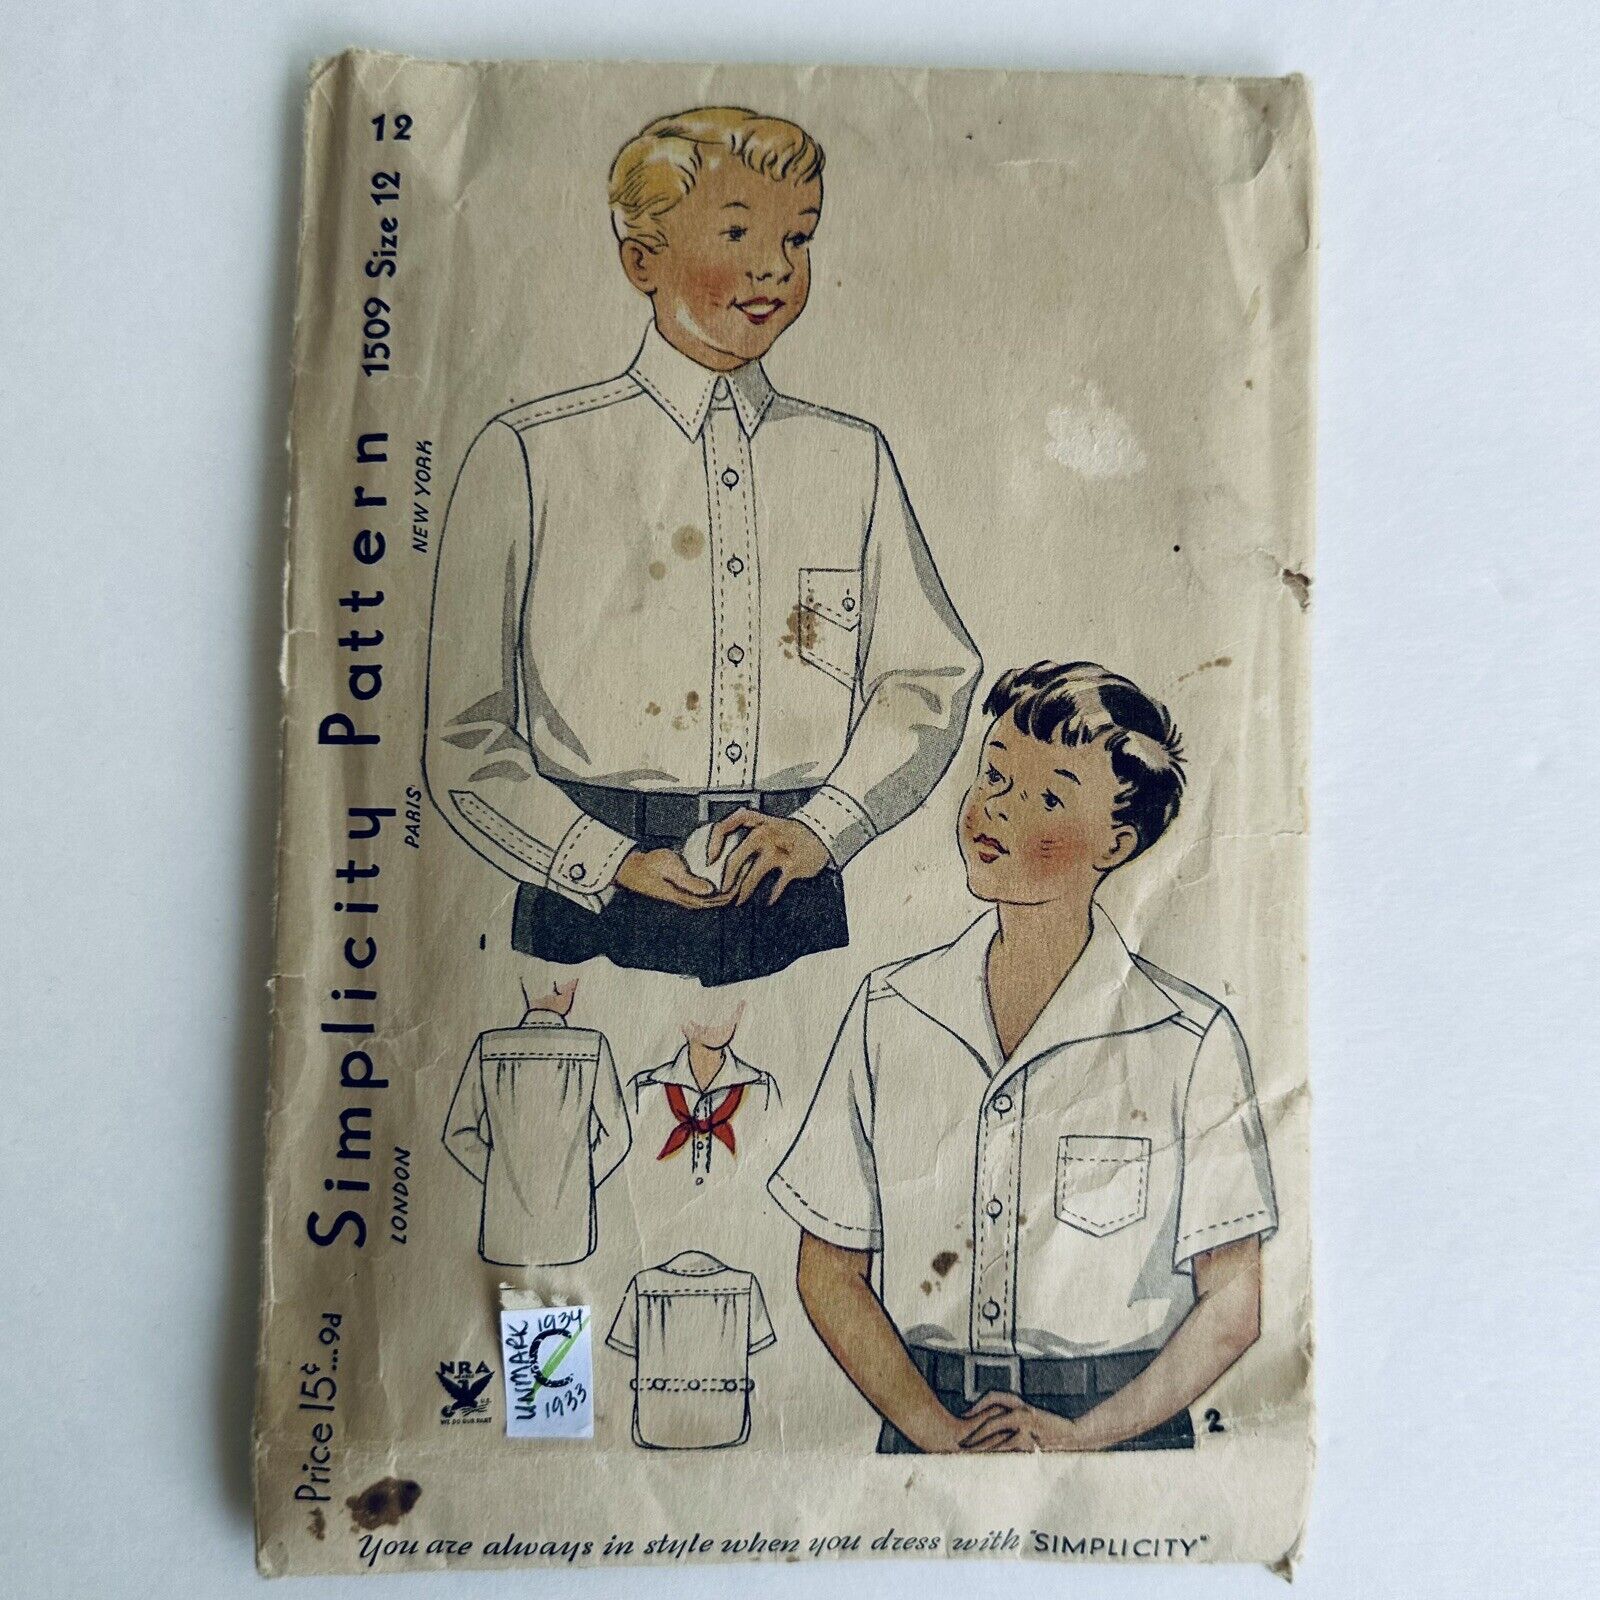 Vintage 30s SIMPLICITY Sewing Pattern Boys Shirt #1509 Size 12 